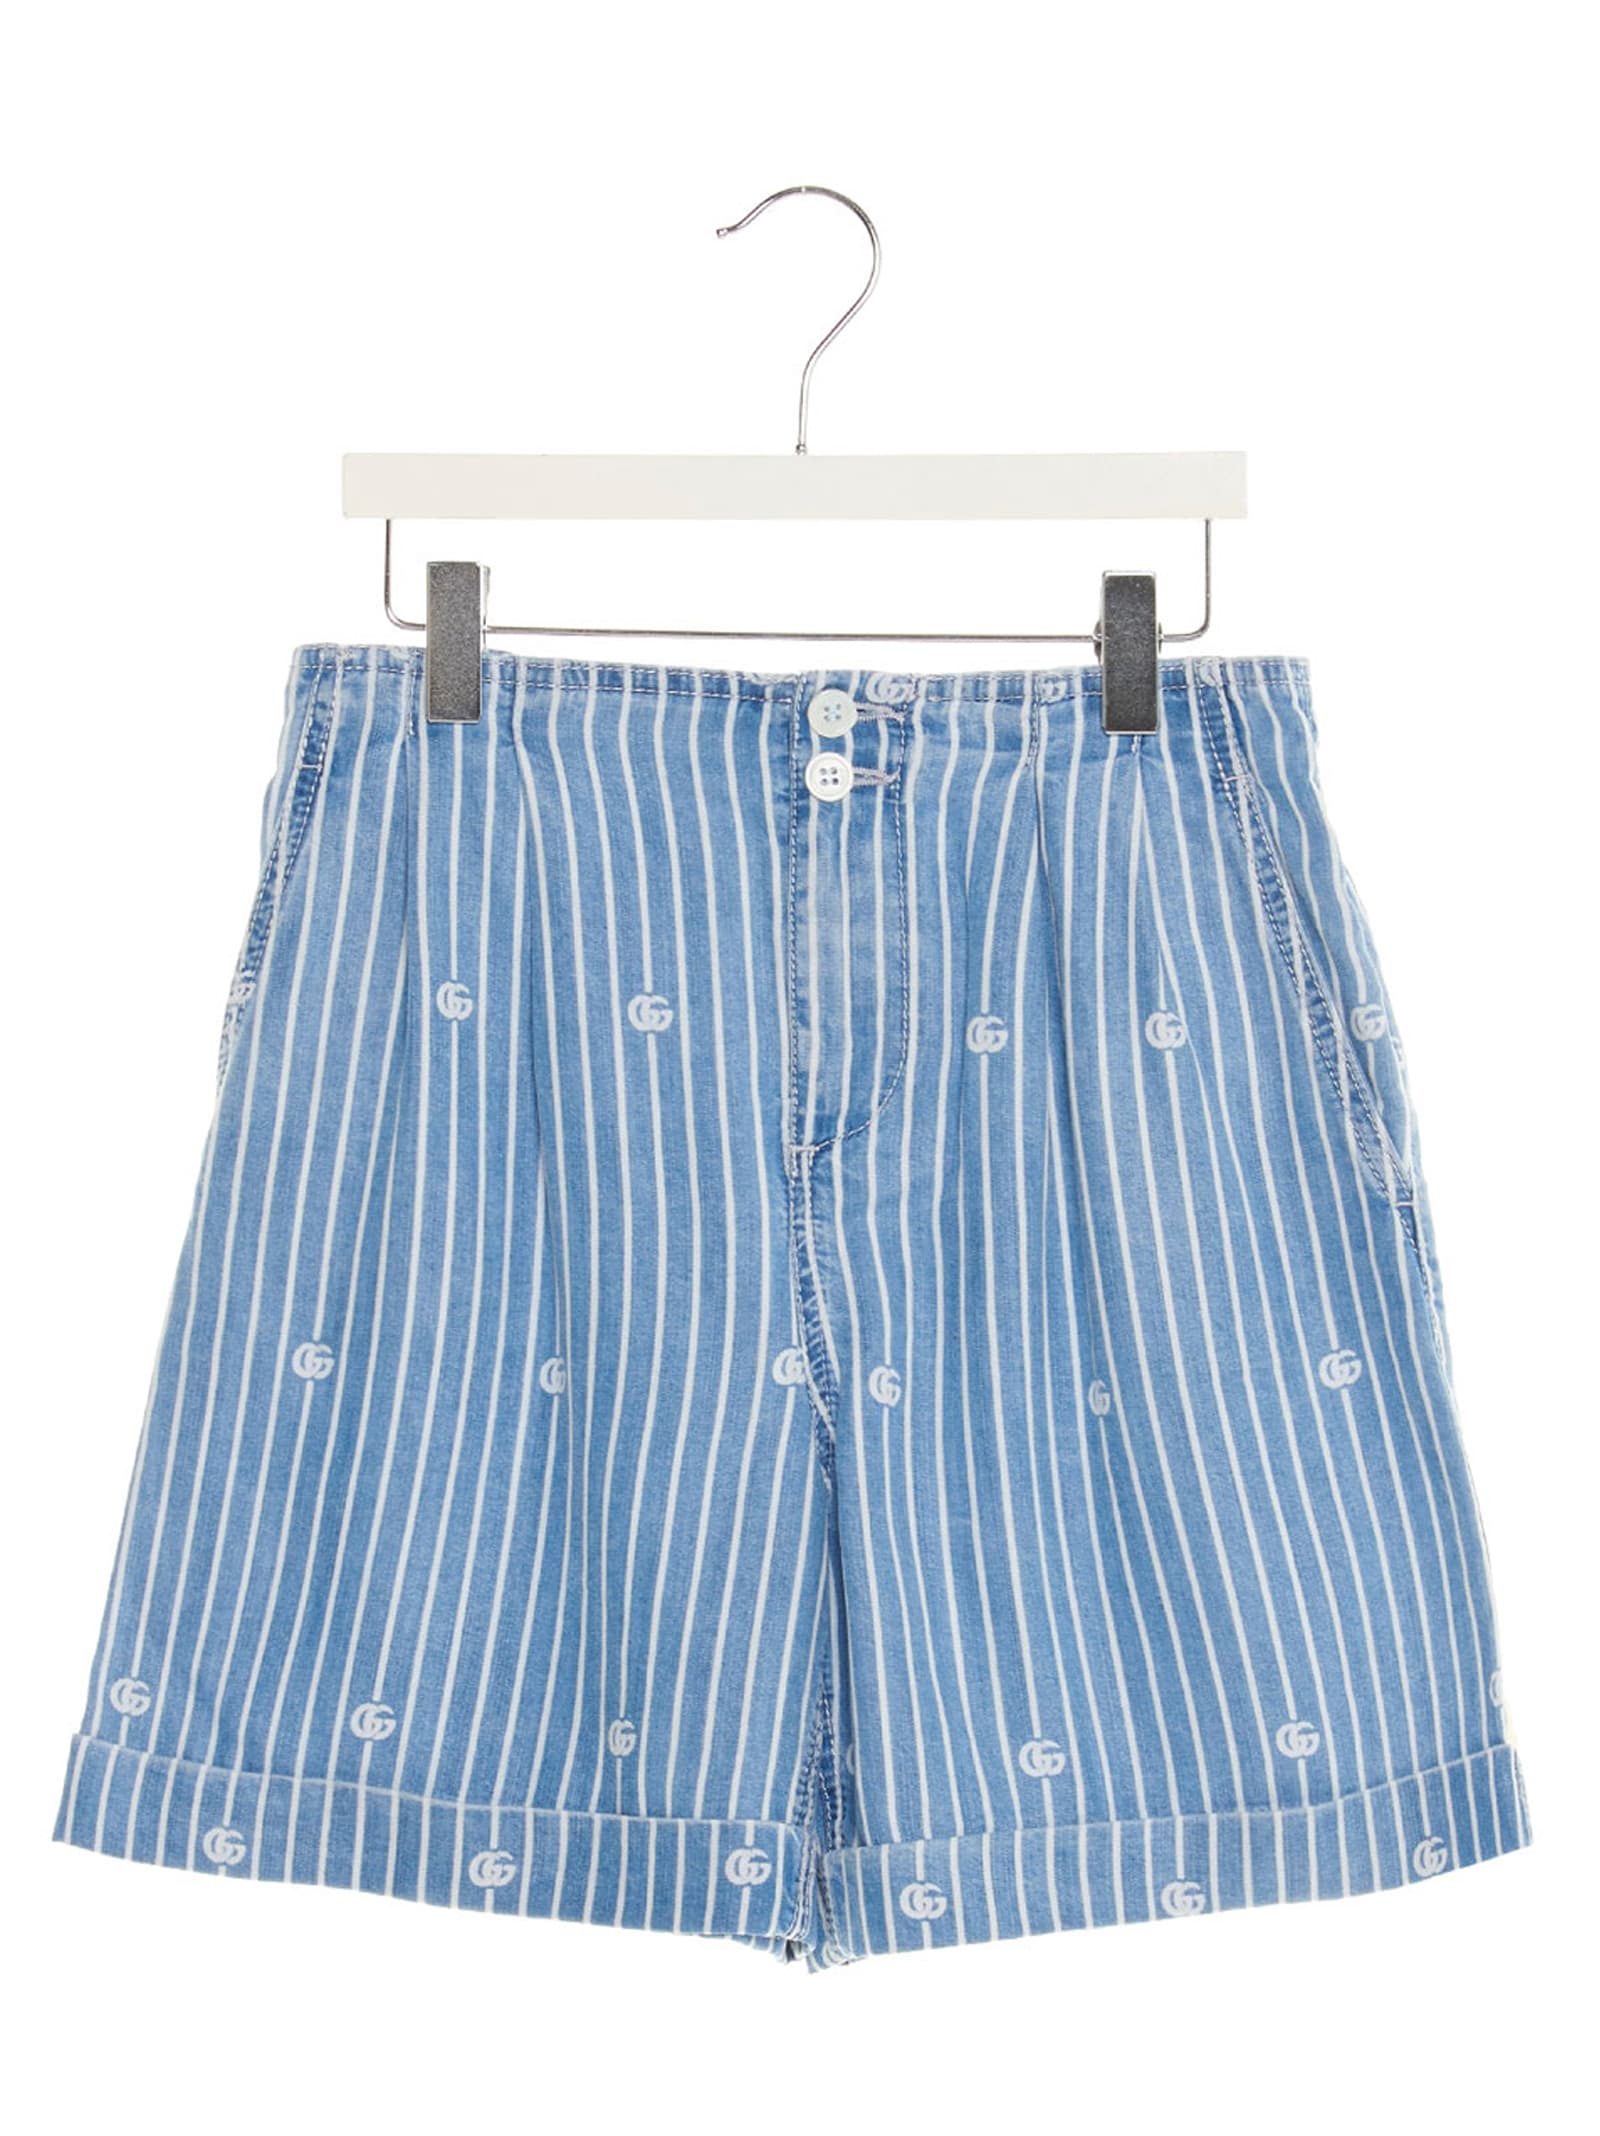 Gucci Kids' Striped Shorts In White And Blue In Light Blue